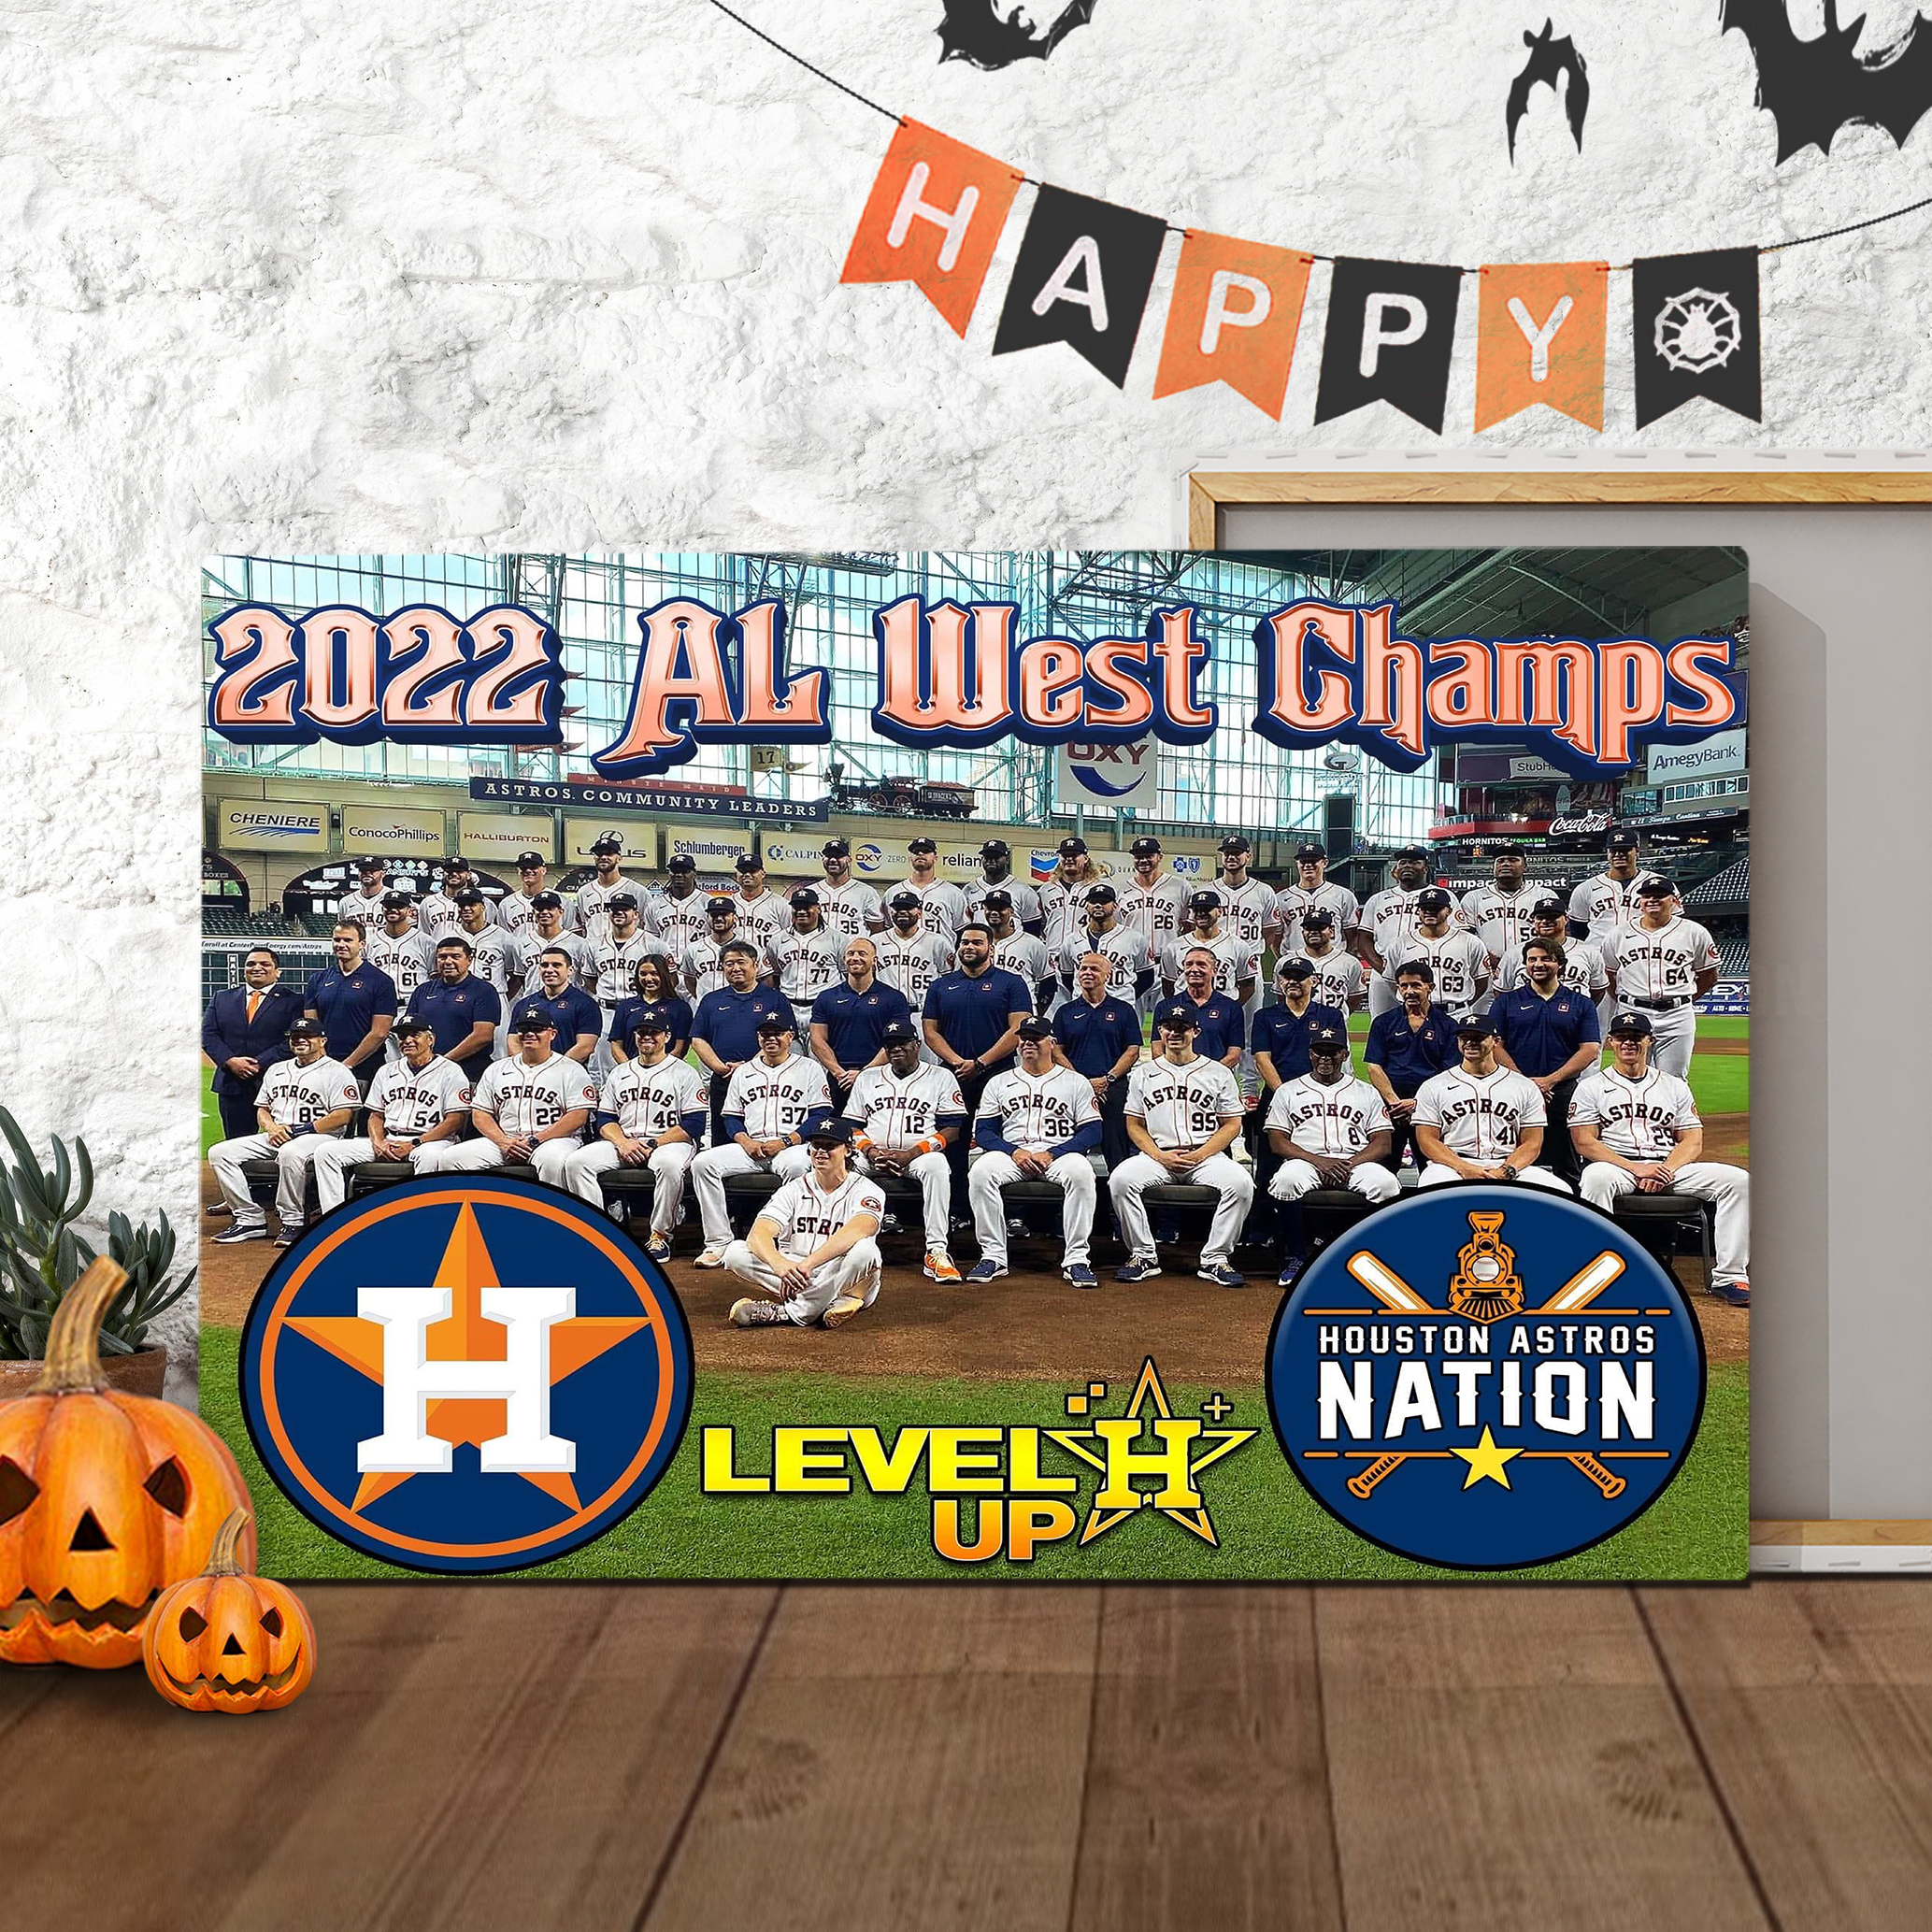 2023 Houston Astros Division Champions Poster Canvas - Roostershirt